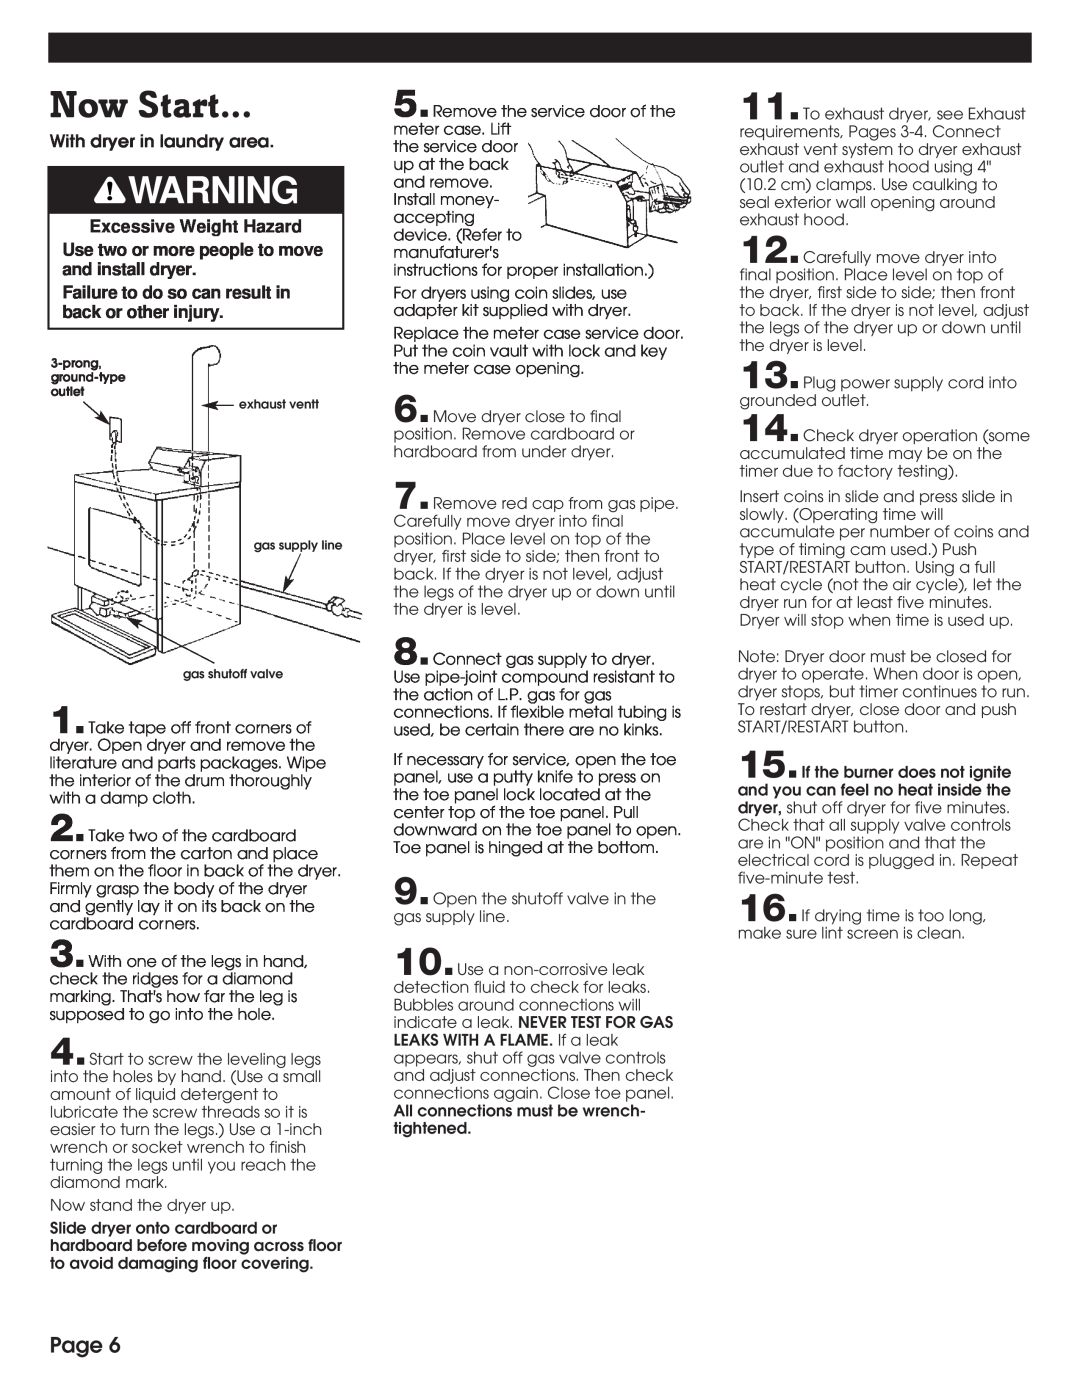 Whirlpool 8527795 installation instructions Now Start, With dryer in laundry area, Excessive Weight Hazard, Page 